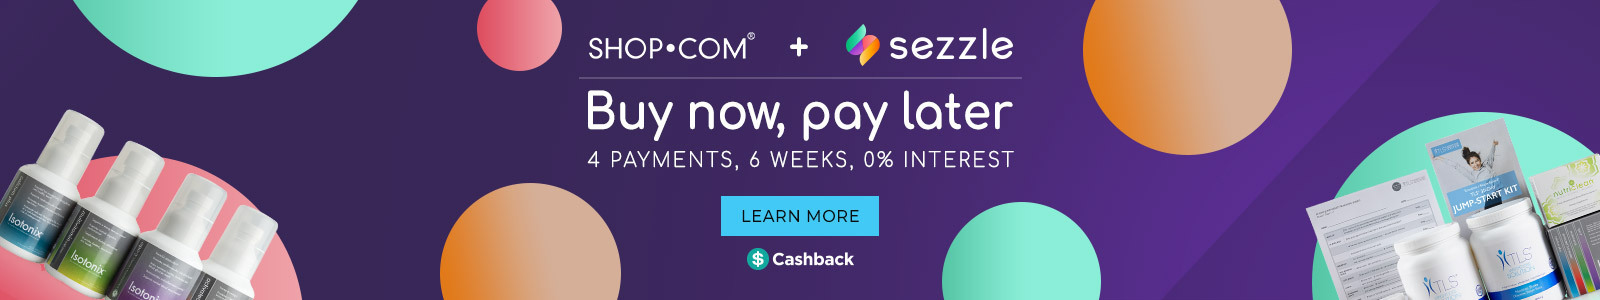 Buy Now Pay Later with Sezzle. 4 payments, 6 weeks, 0 interest. Learn more.